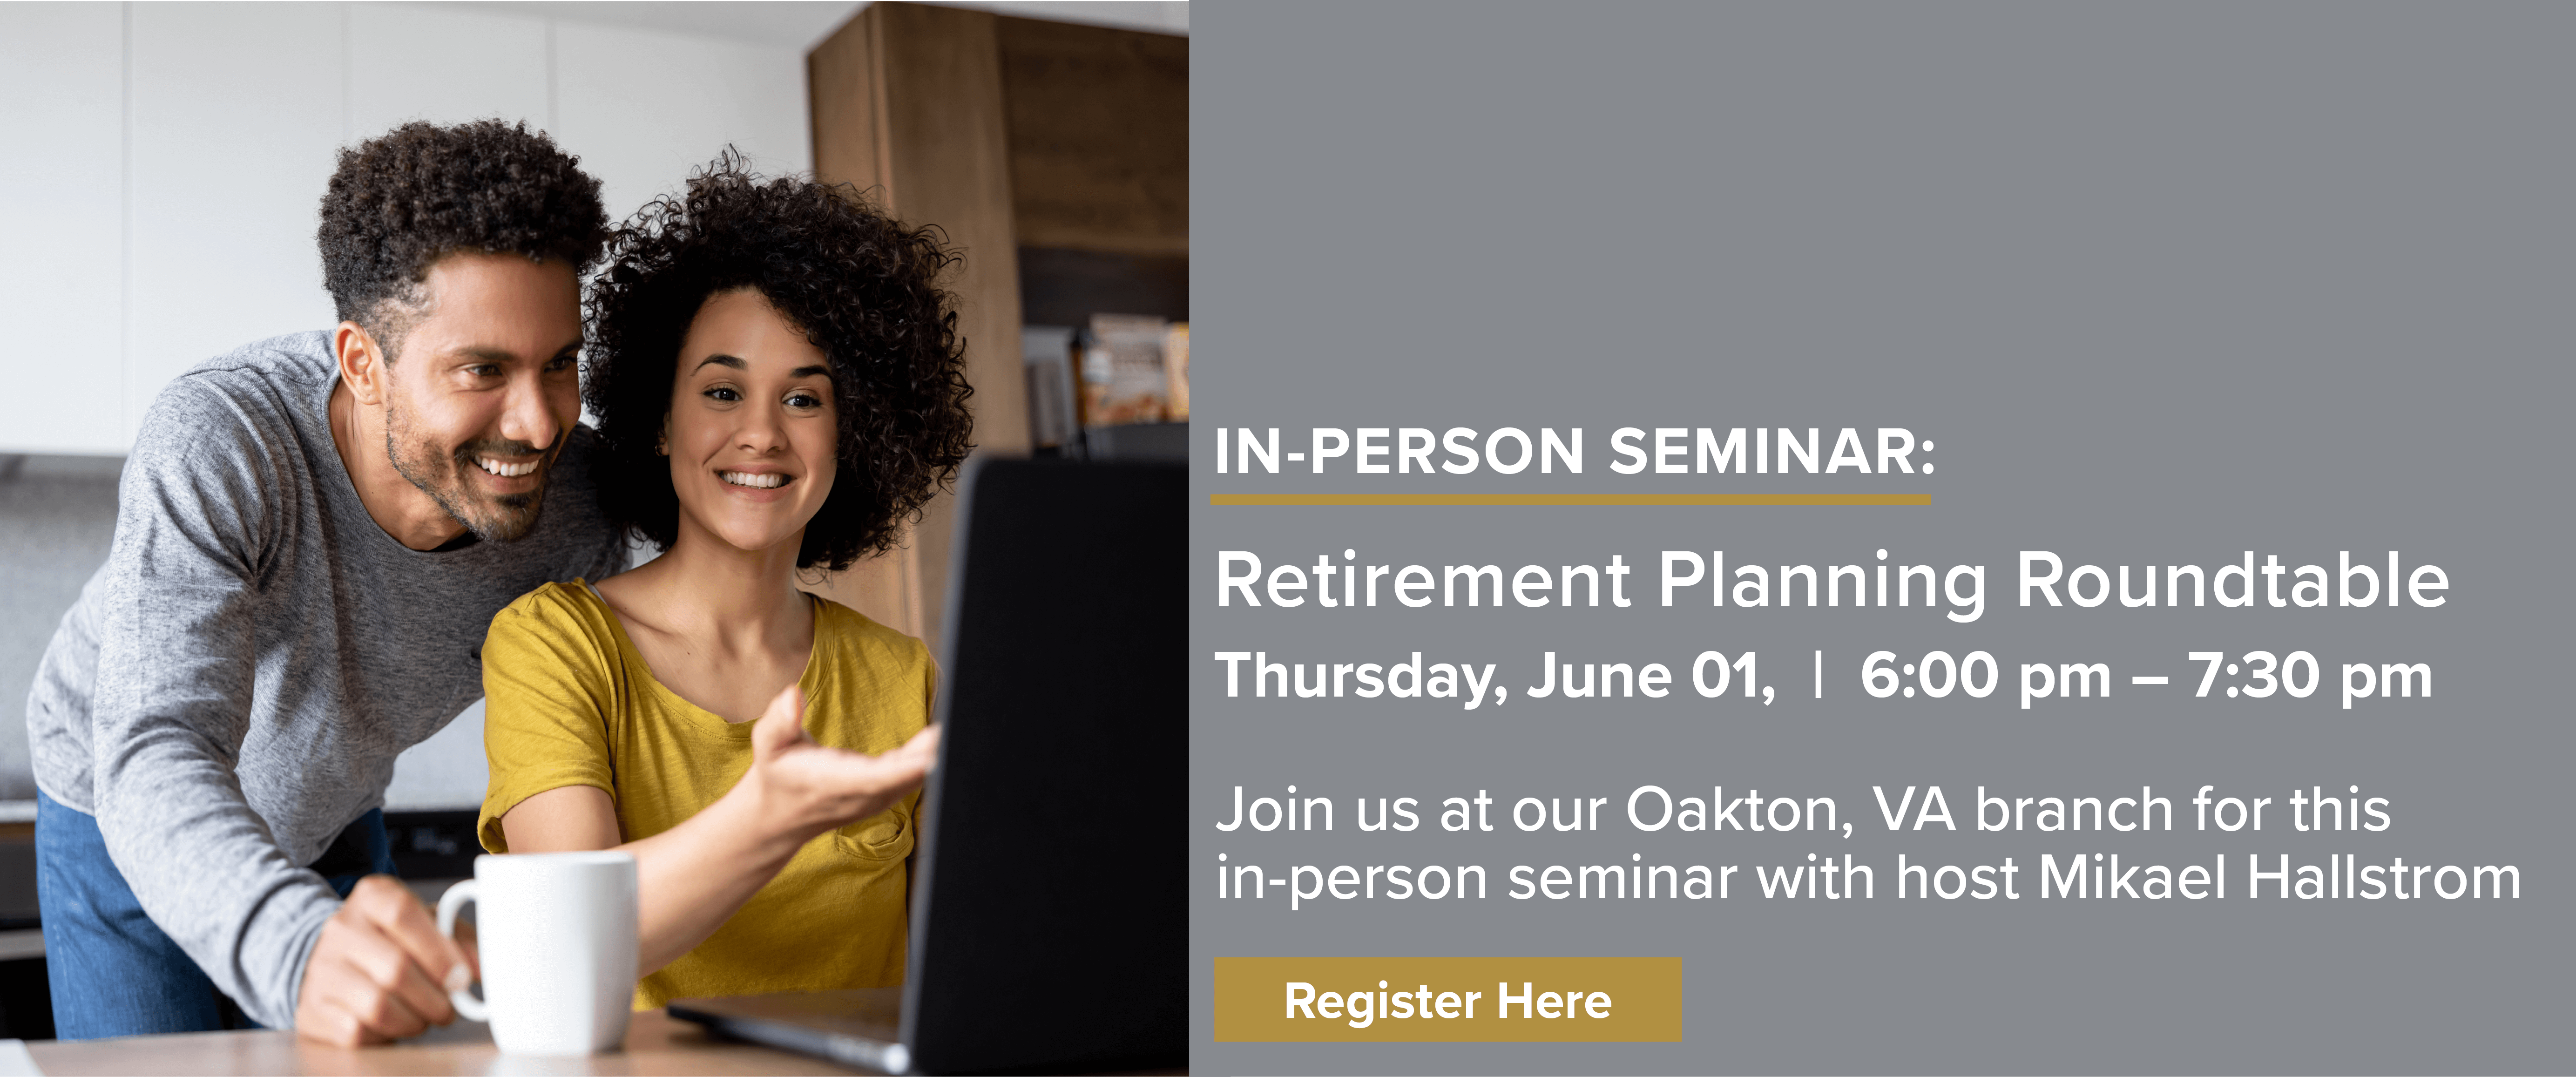 IN-PERSON SEMINAR:  Retirement Planning Roundtable Thursday, June 01,  |  6:00 pm ÃƒÆ’Ã†â€™Ãƒâ€šÃ‚Â¢ÃƒÆ’Ã‚Â¢ÃƒÂ¢Ã¢â€šÂ¬Ã…Â¡Ãƒâ€šÃ‚Â¬ÃƒÆ’Ã‚Â¢ÃƒÂ¢Ã¢â‚¬Å¡Ã‚Â¬Ãƒâ€¦Ã¢â‚¬Å“ 7:30 pm  Join us at our Oakton, VA branch for this in-person seminar with host Mikael Hallstrom  Register Here